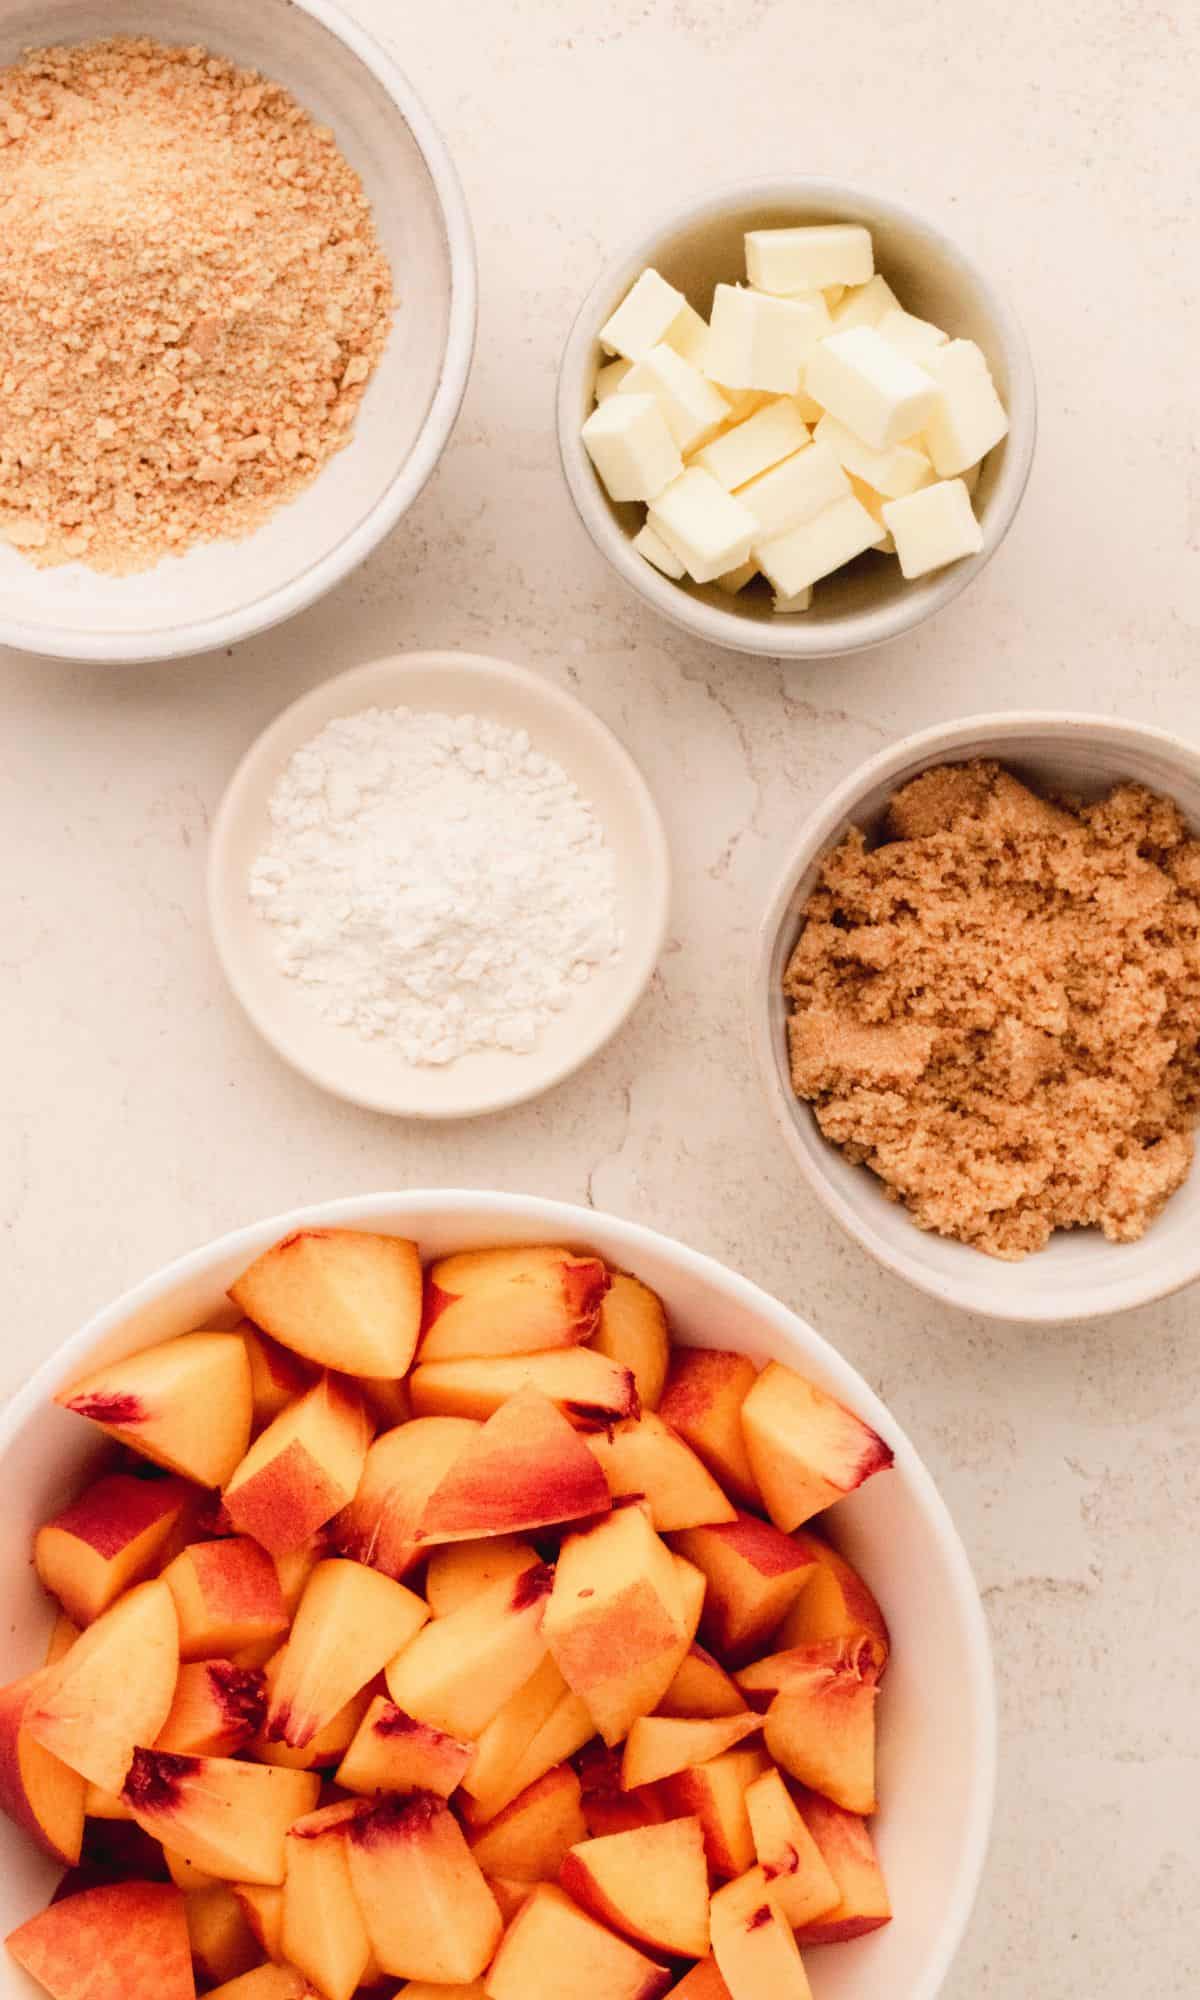 Peach crisp ingredients in varying bowl shapes and sizes.